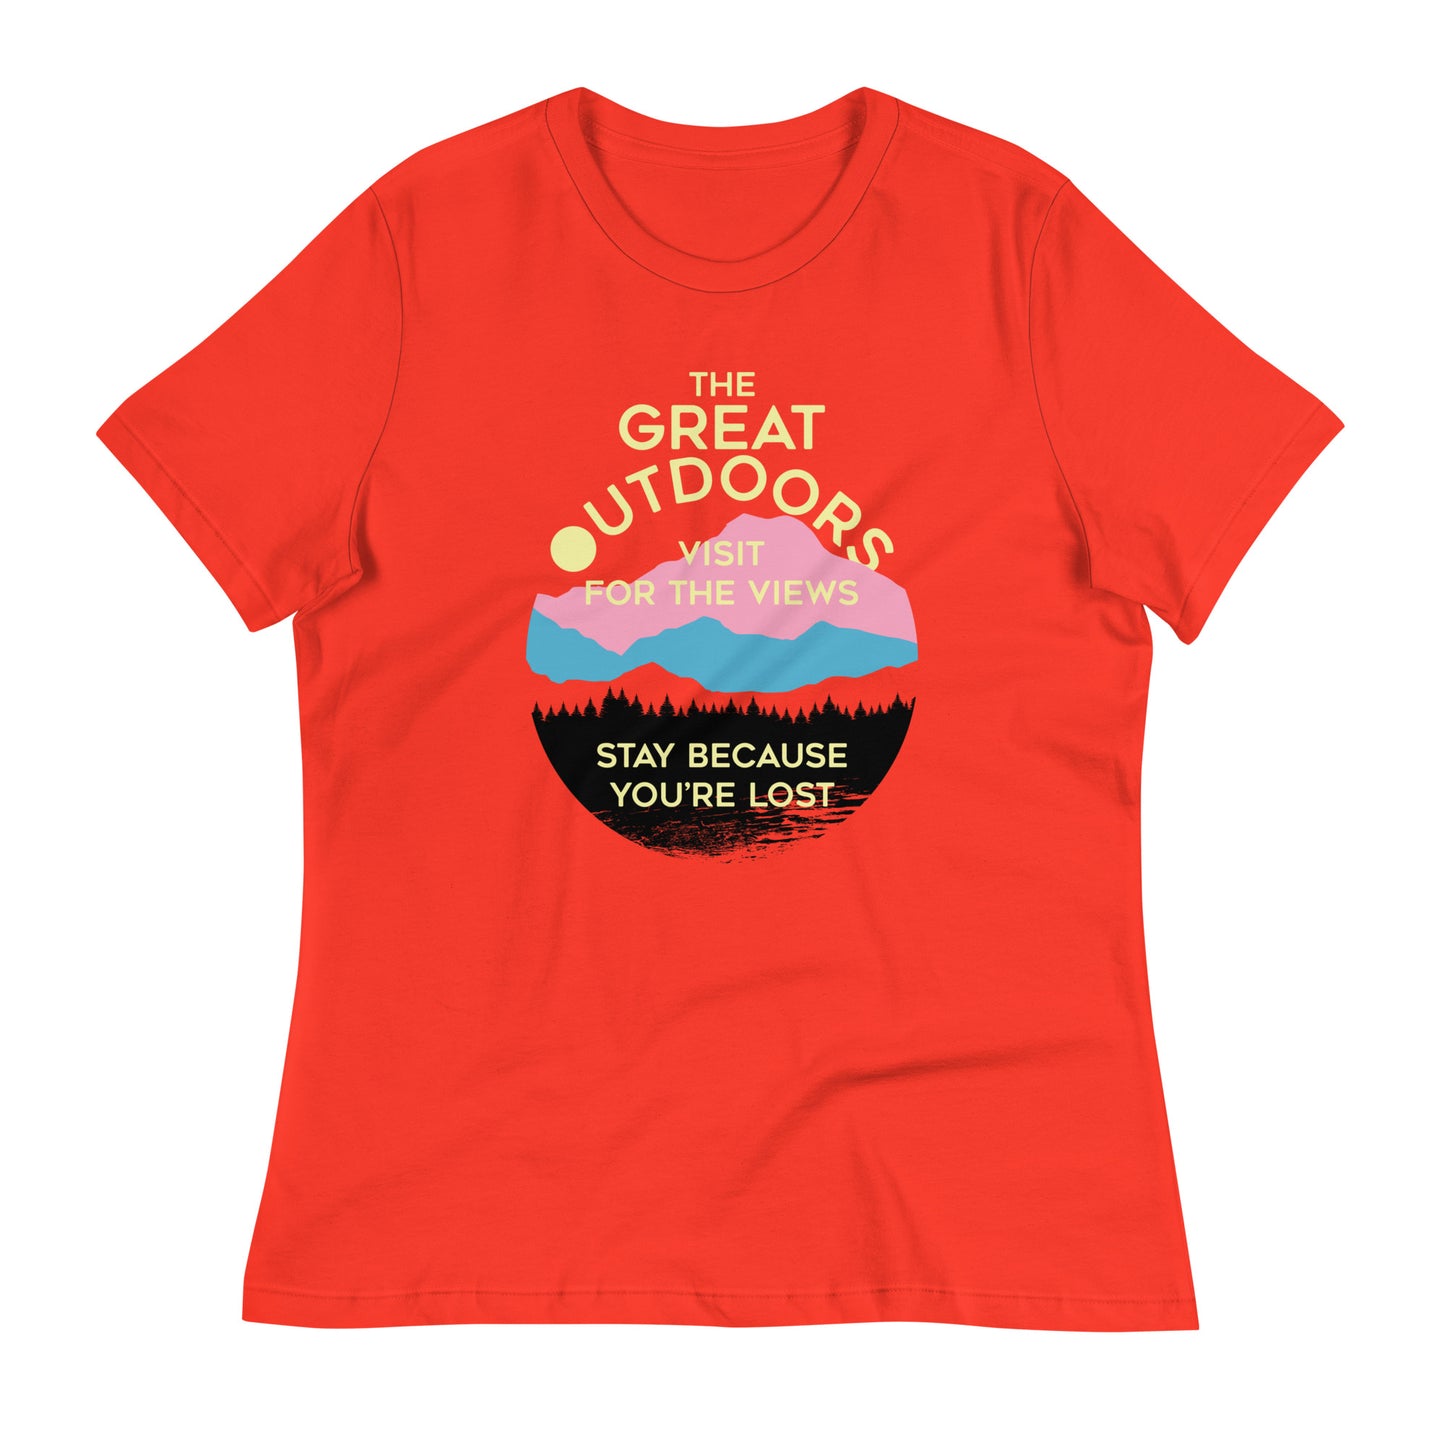 The Great Outdoors Women's Signature Tee